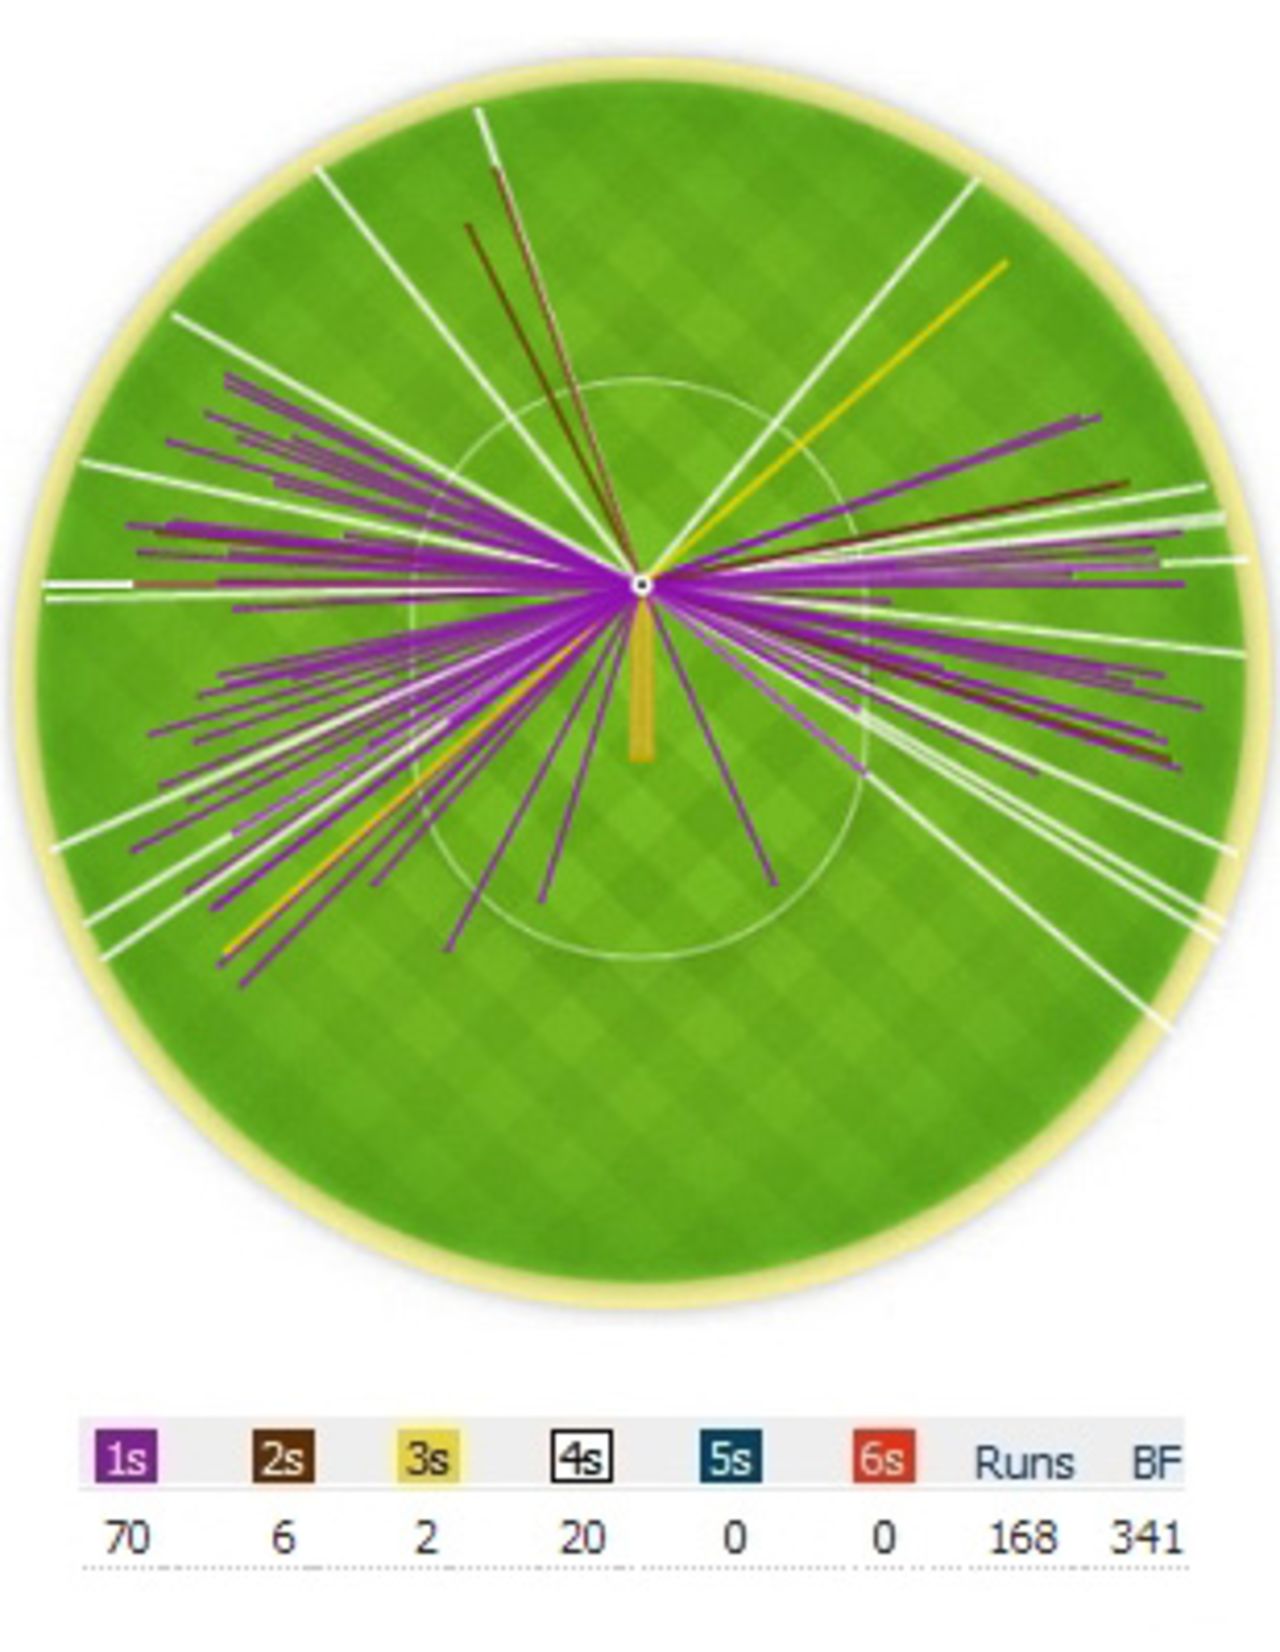 Alastair Cook's wagon wheel after the end of the fourth day, India v England, 1st Test, Ahmedabad, 4th day, November 18, 2012